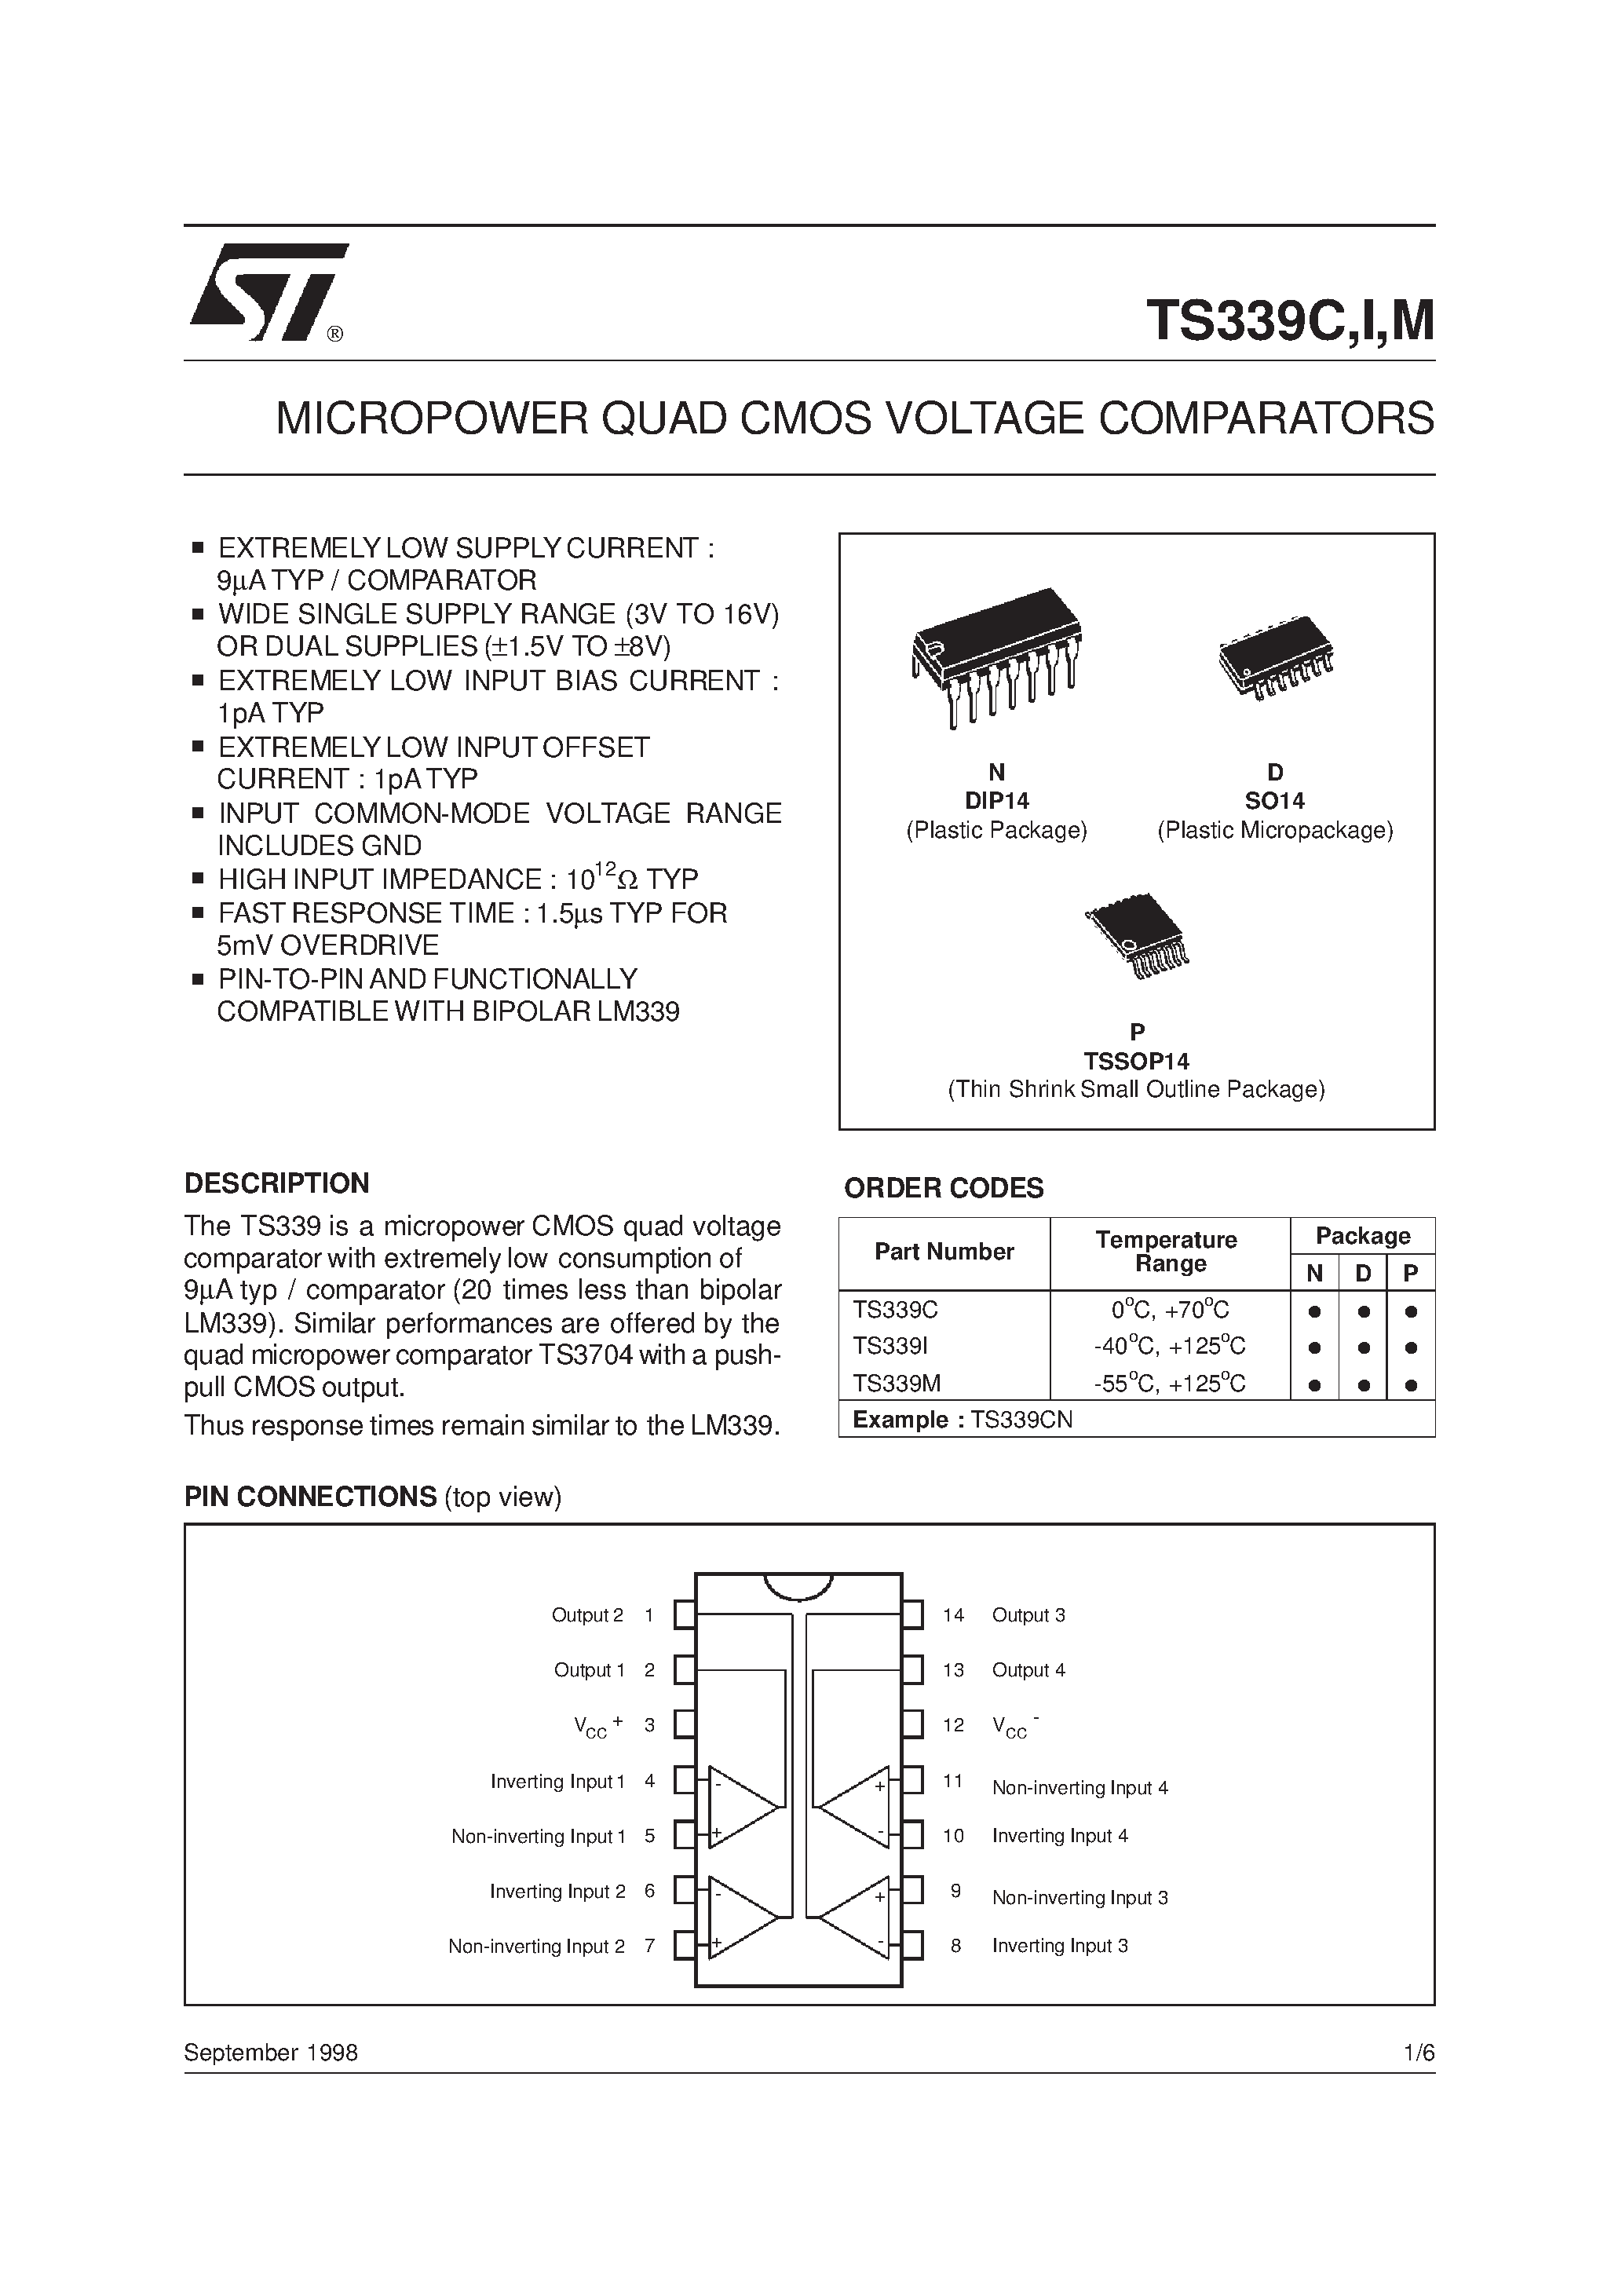 Datasheet TS339I - MICROPOWER QUAD CMOS VOLTAGE COMPARATORS page 1